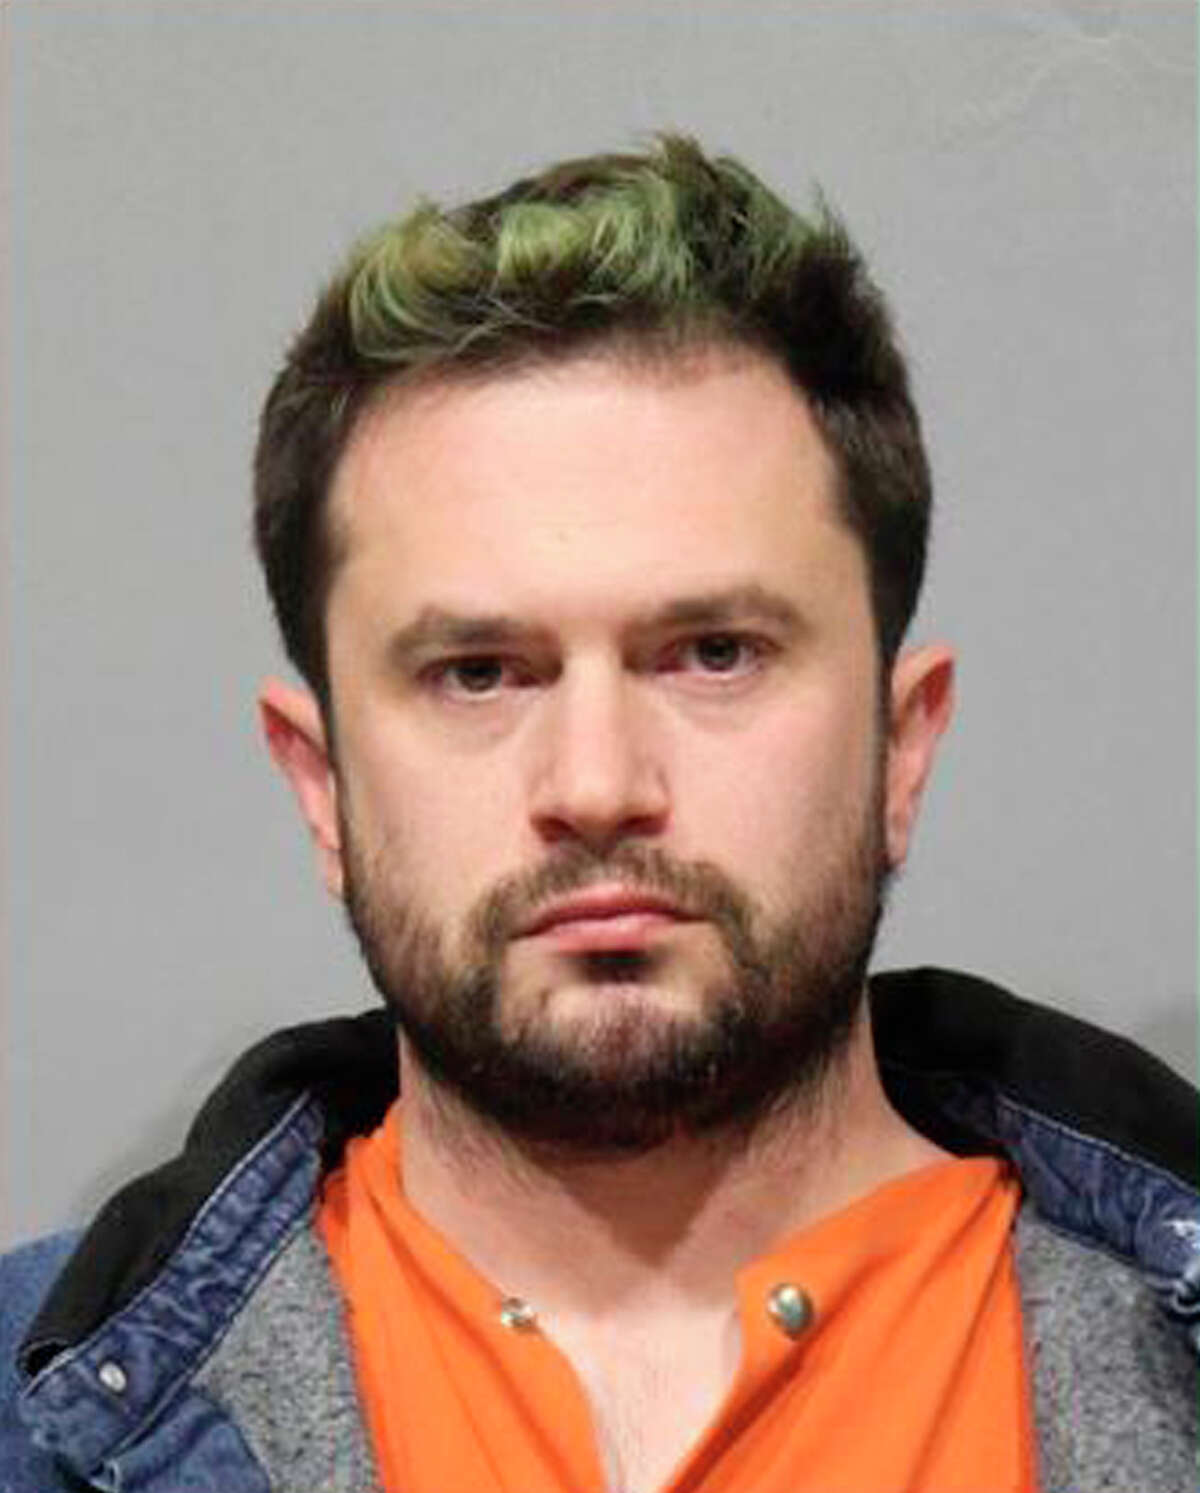 In this photo released by the Washtenaw County Jail, Scott Walters, is shown in Ann Arbor, Mich. Walters, and his spouse, David Daniels, a University of Michigan professor and world-famous opera countertenor, were arrested Tuesday, Jan. 29, 2019 in Ann Arbor, Mich., on allegations that they sexually assaulted a singer in Houston in 2010. (Washtenaw County Jail via AP)